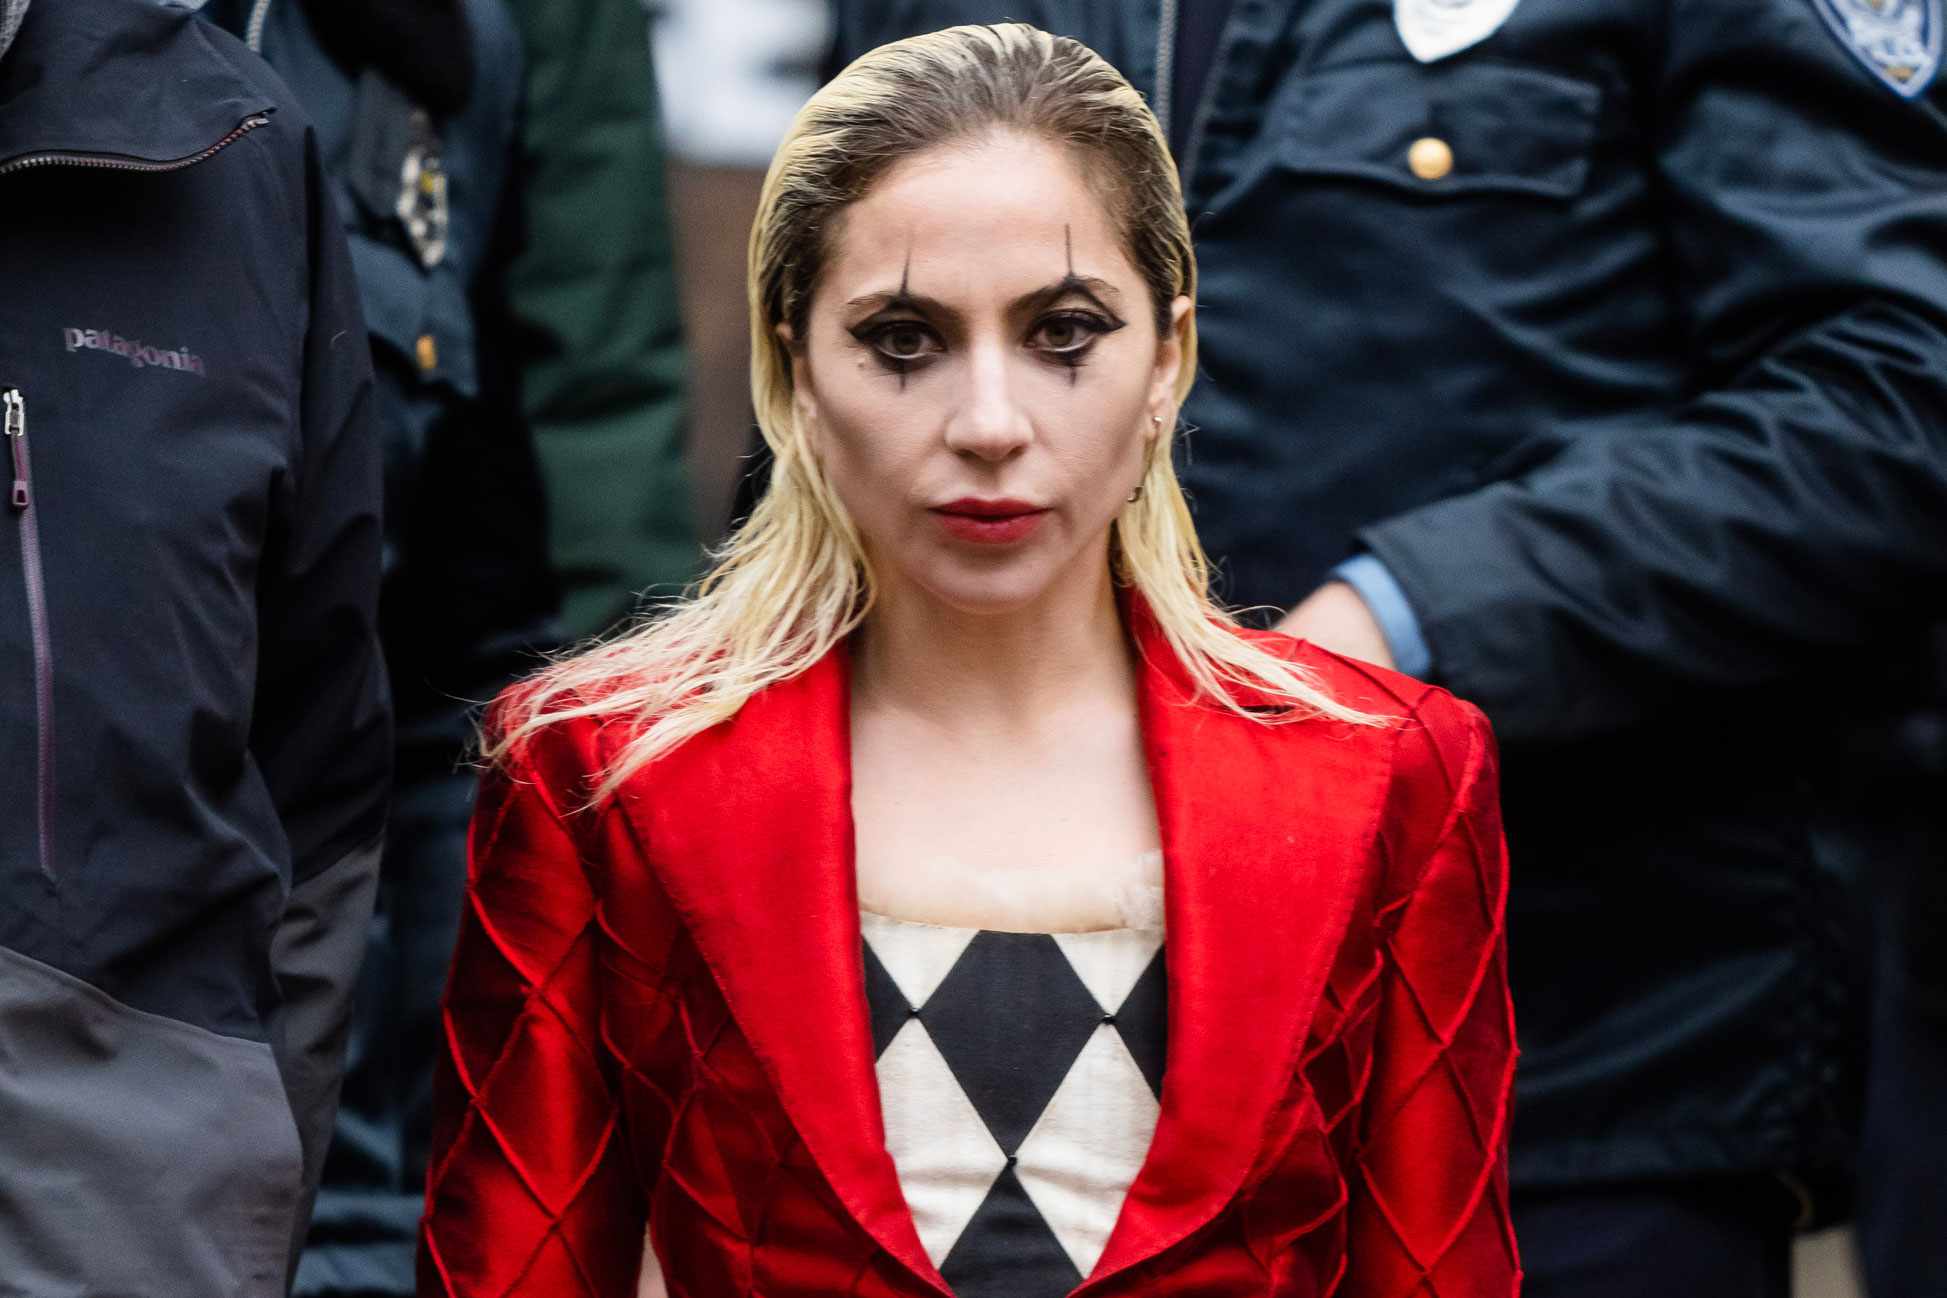 NEW YORK, NEW YORK - MARCH 25: Lady Gaga is seen filming "The Joker 2" in City Hall on March 25, 2023 in New York City. (Photo by Gotham/GC Images)